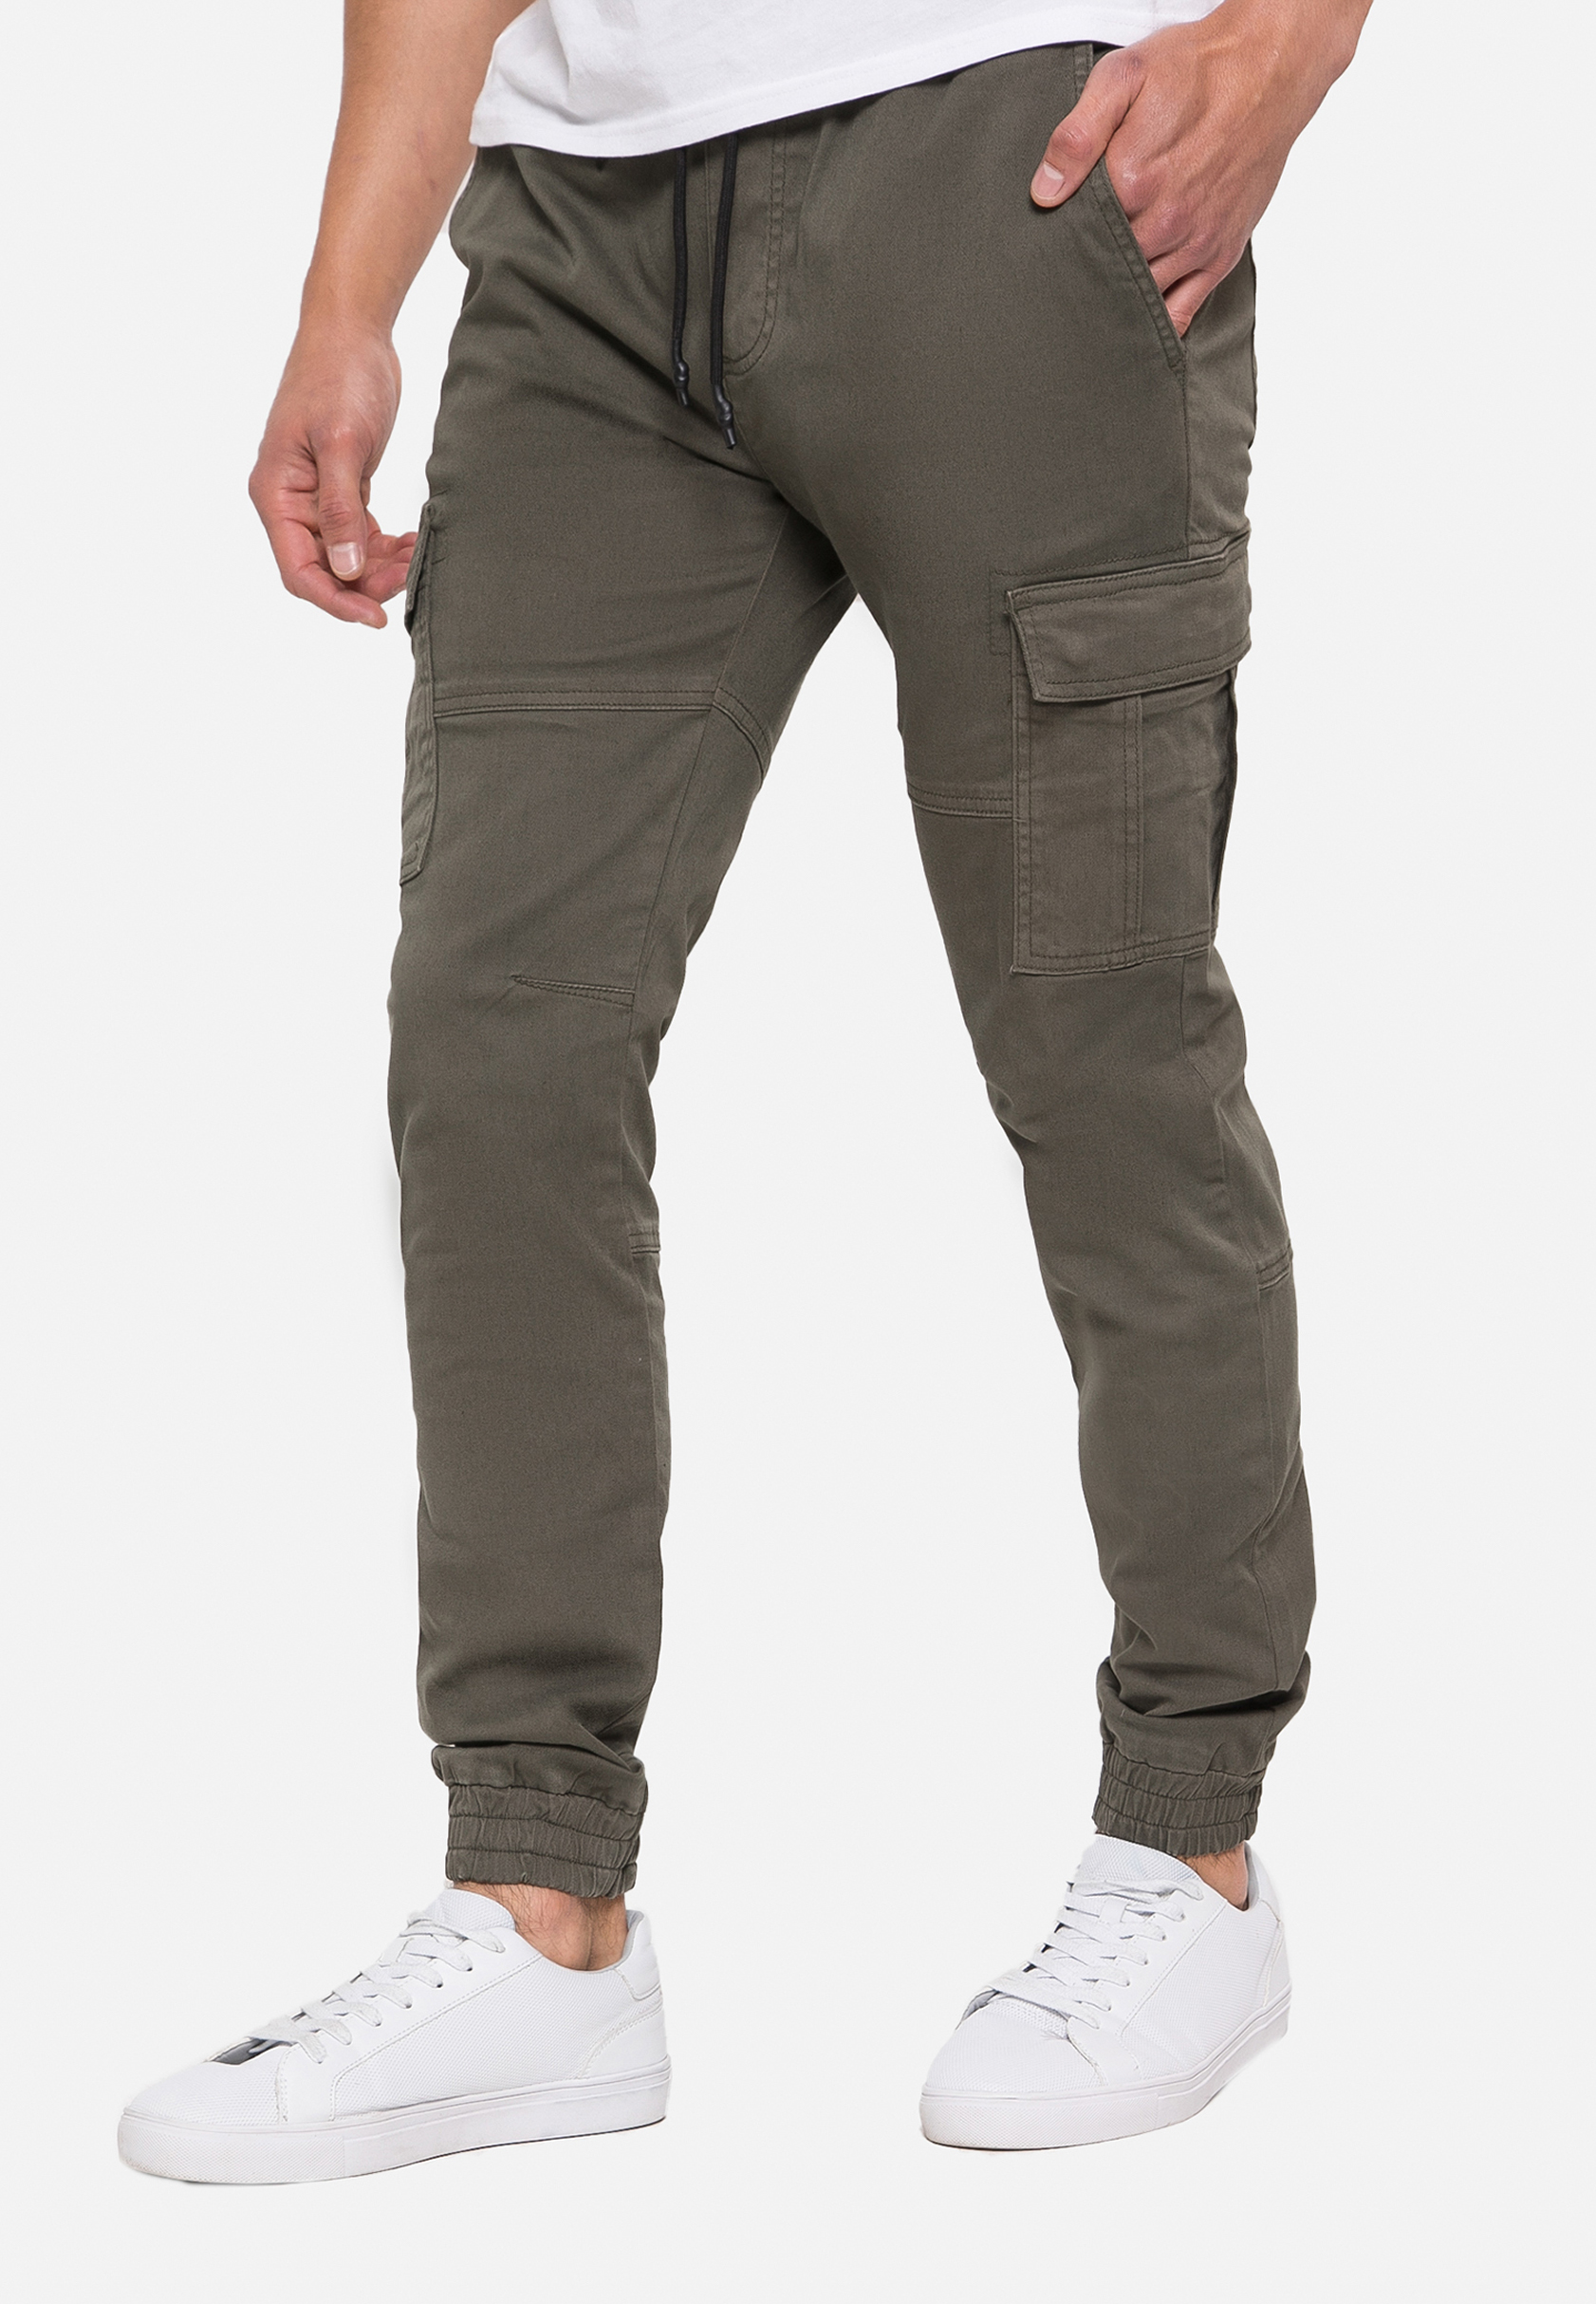 Buy Olive Green Trousers  Pants for Men by ALTHEORY Online  Ajiocom